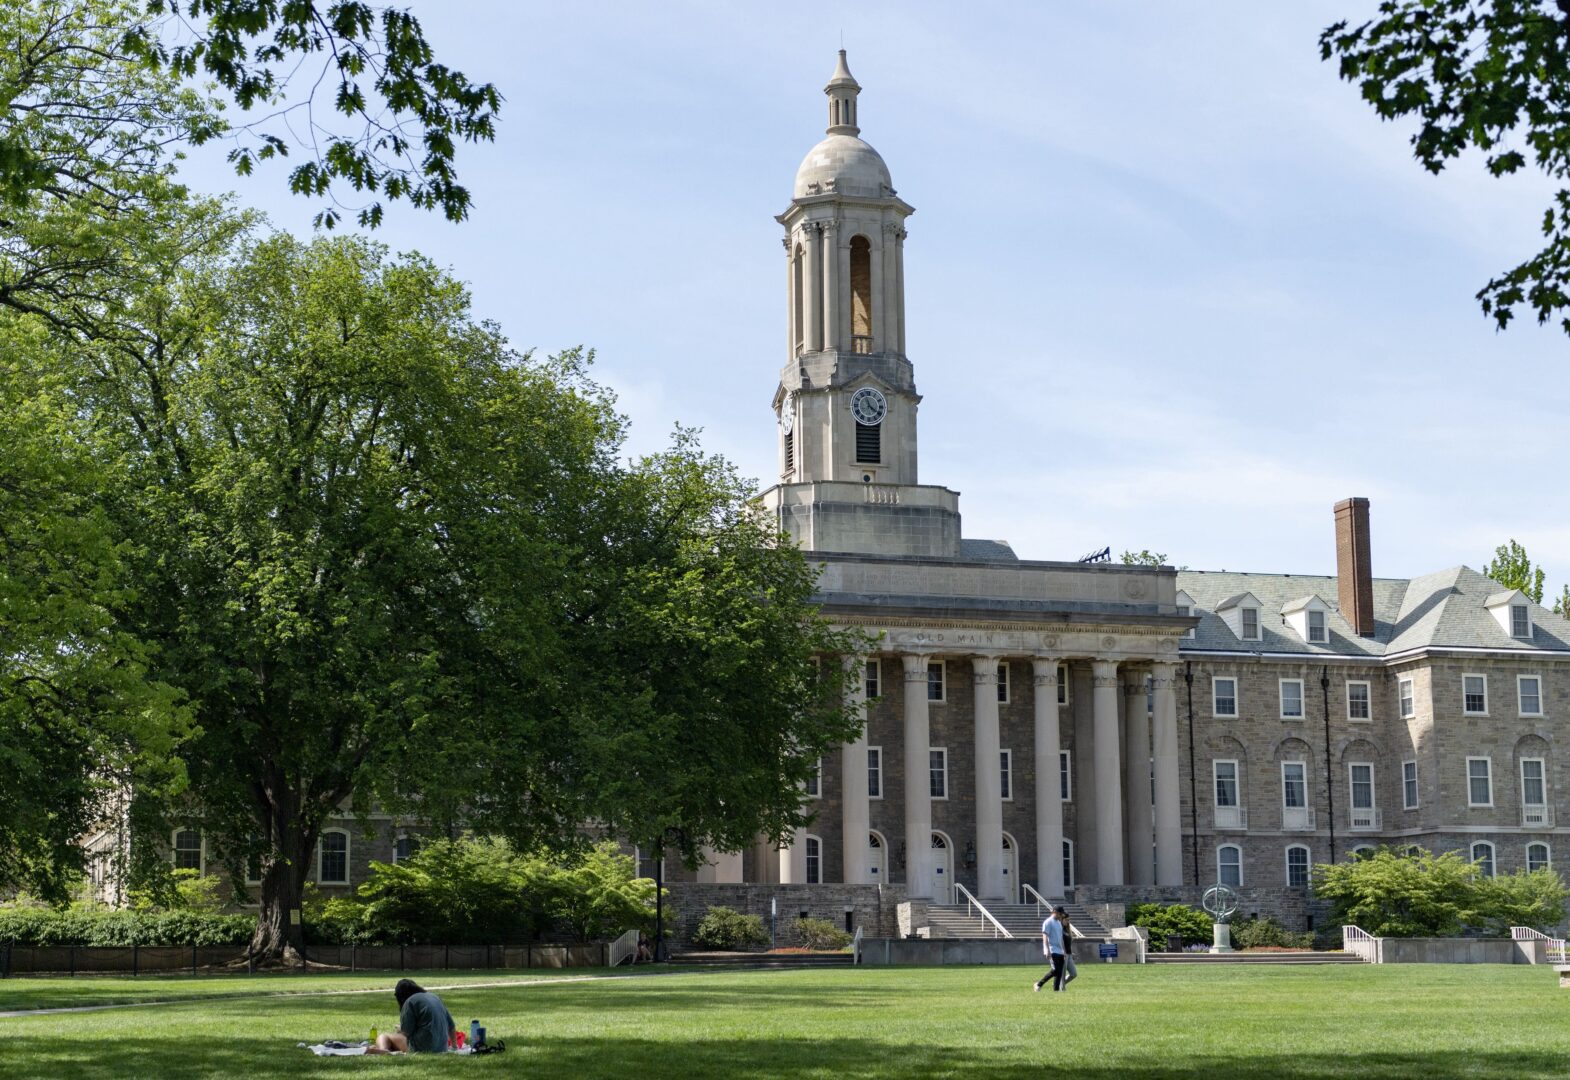 Transparency into how Pennsylvania’s state-related universities, including Penn State, spend annual appropriations is limited.